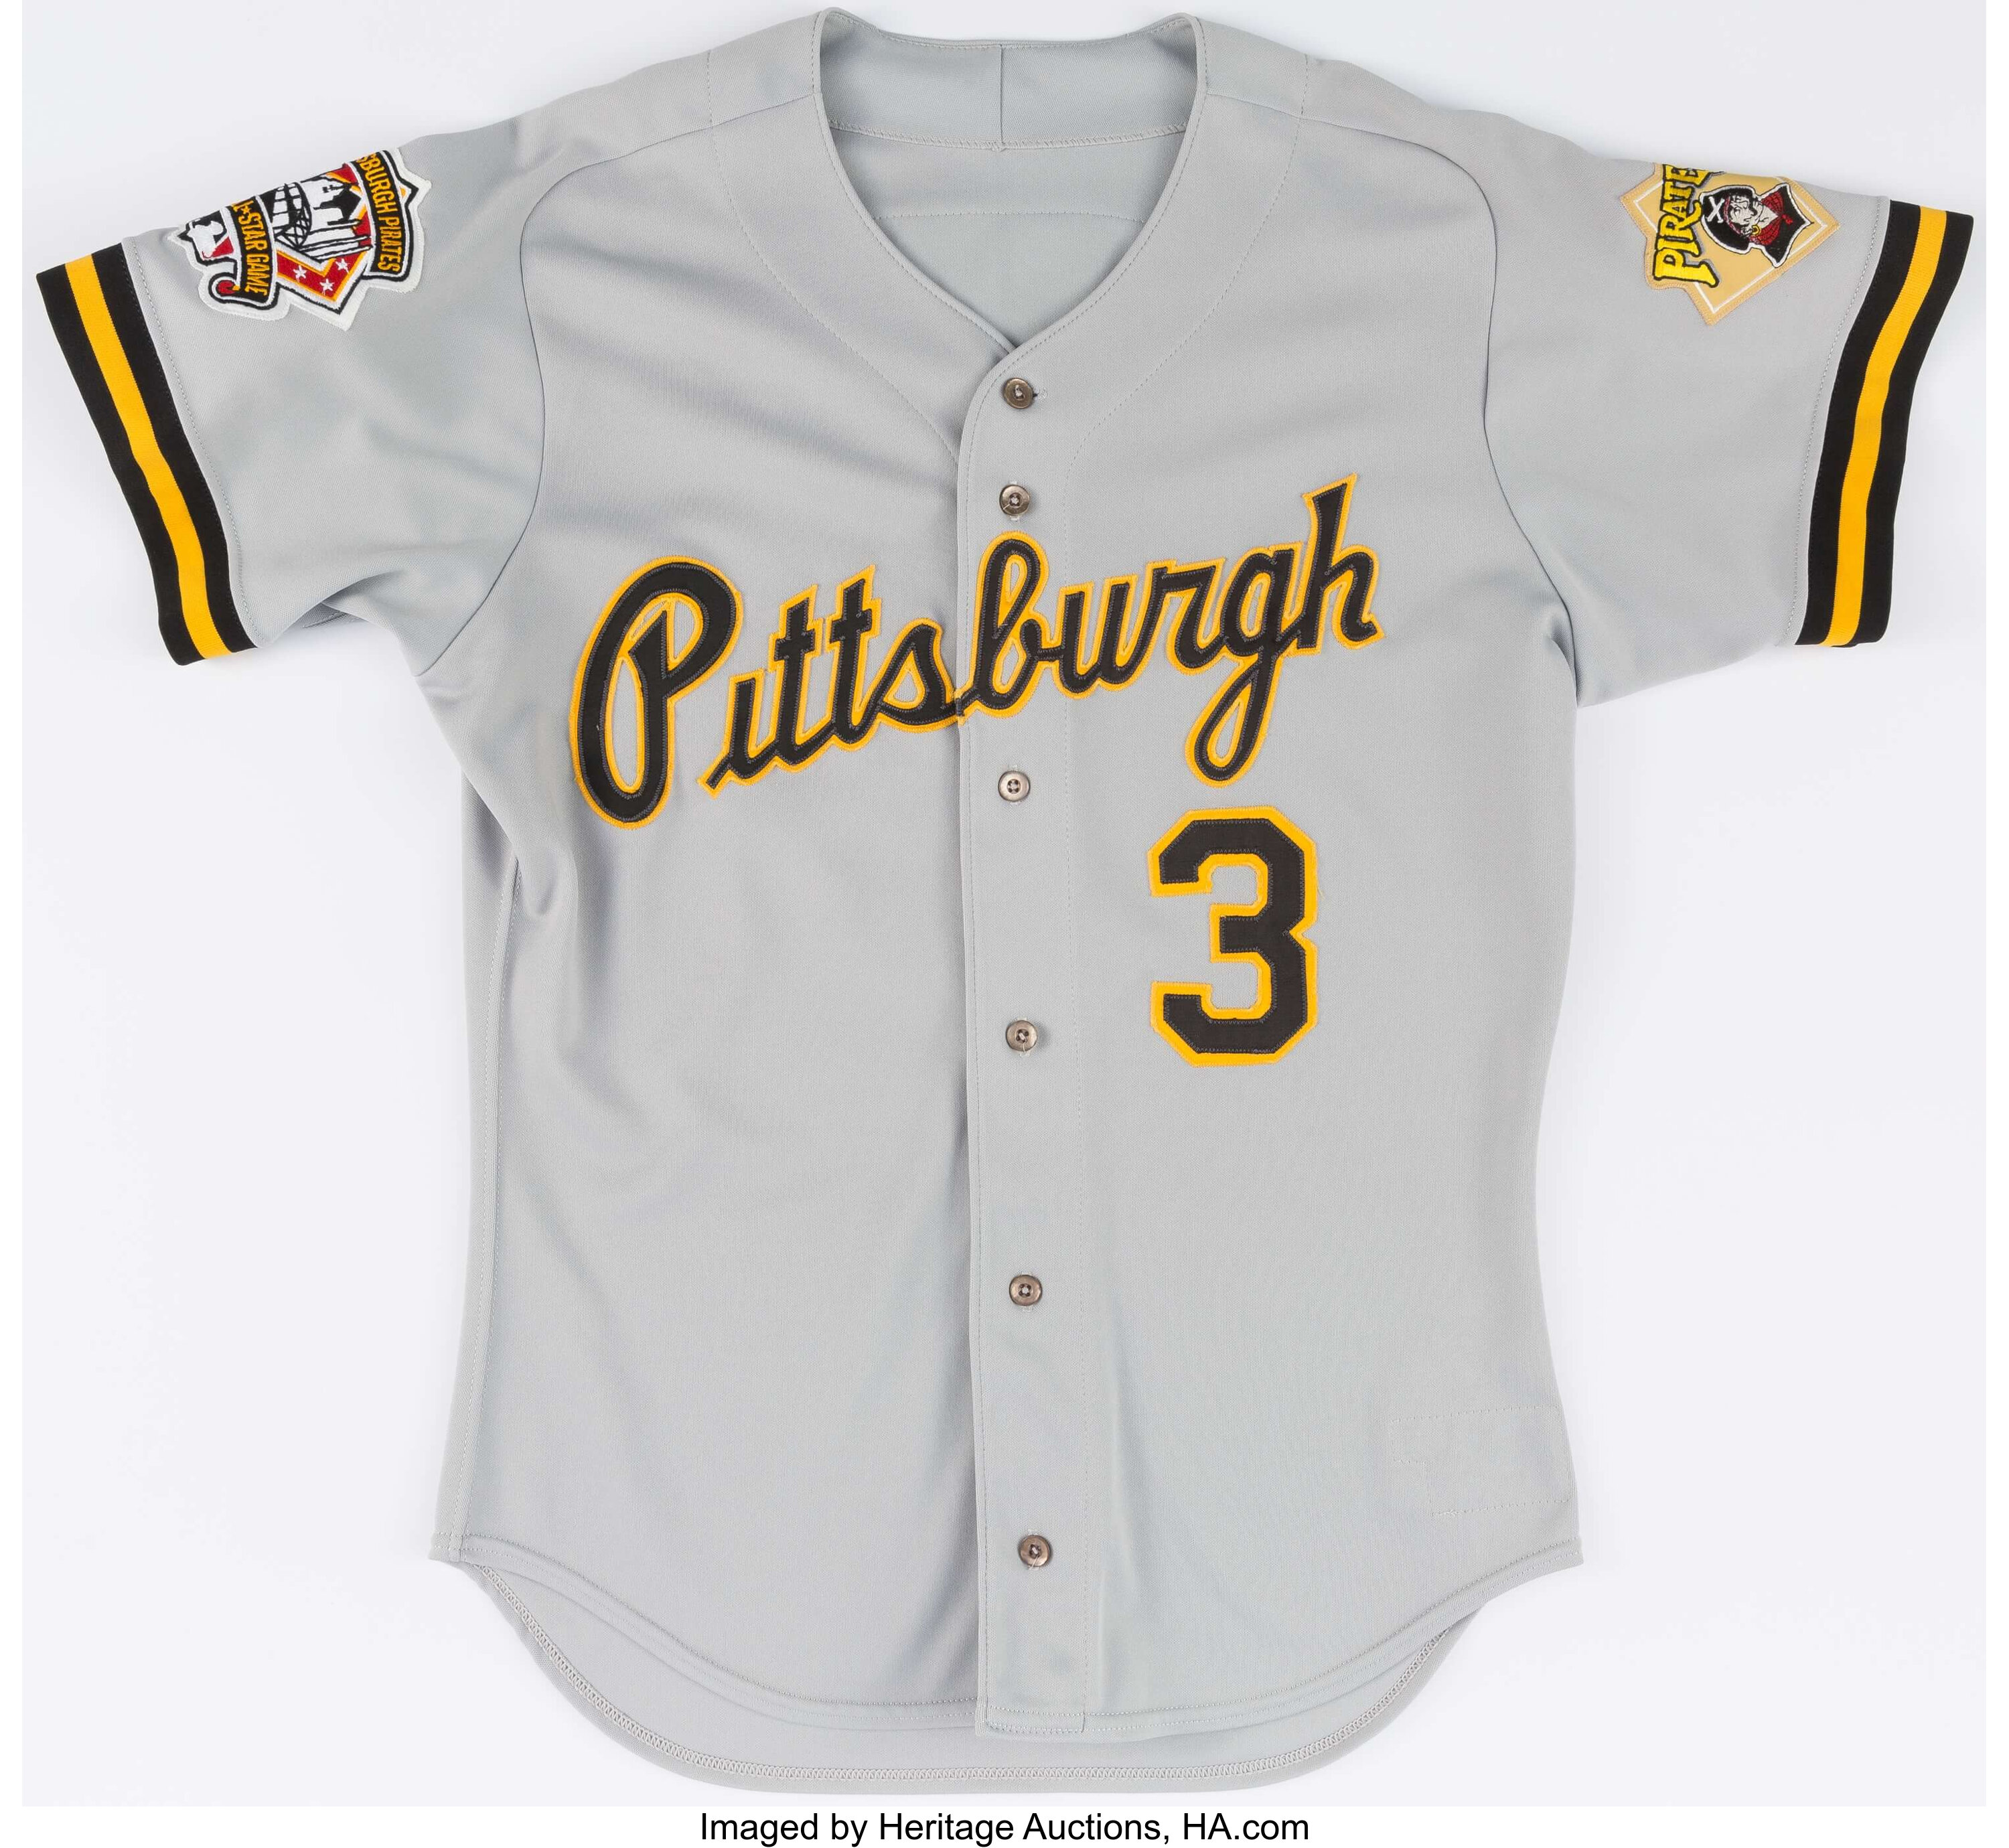 Heritage Uniforms and Jerseys and Stadiums - NFL, MLB, NHL, NBA, NCAA, US  Colleges: Pittsburgh Pirates Uniform and Team History